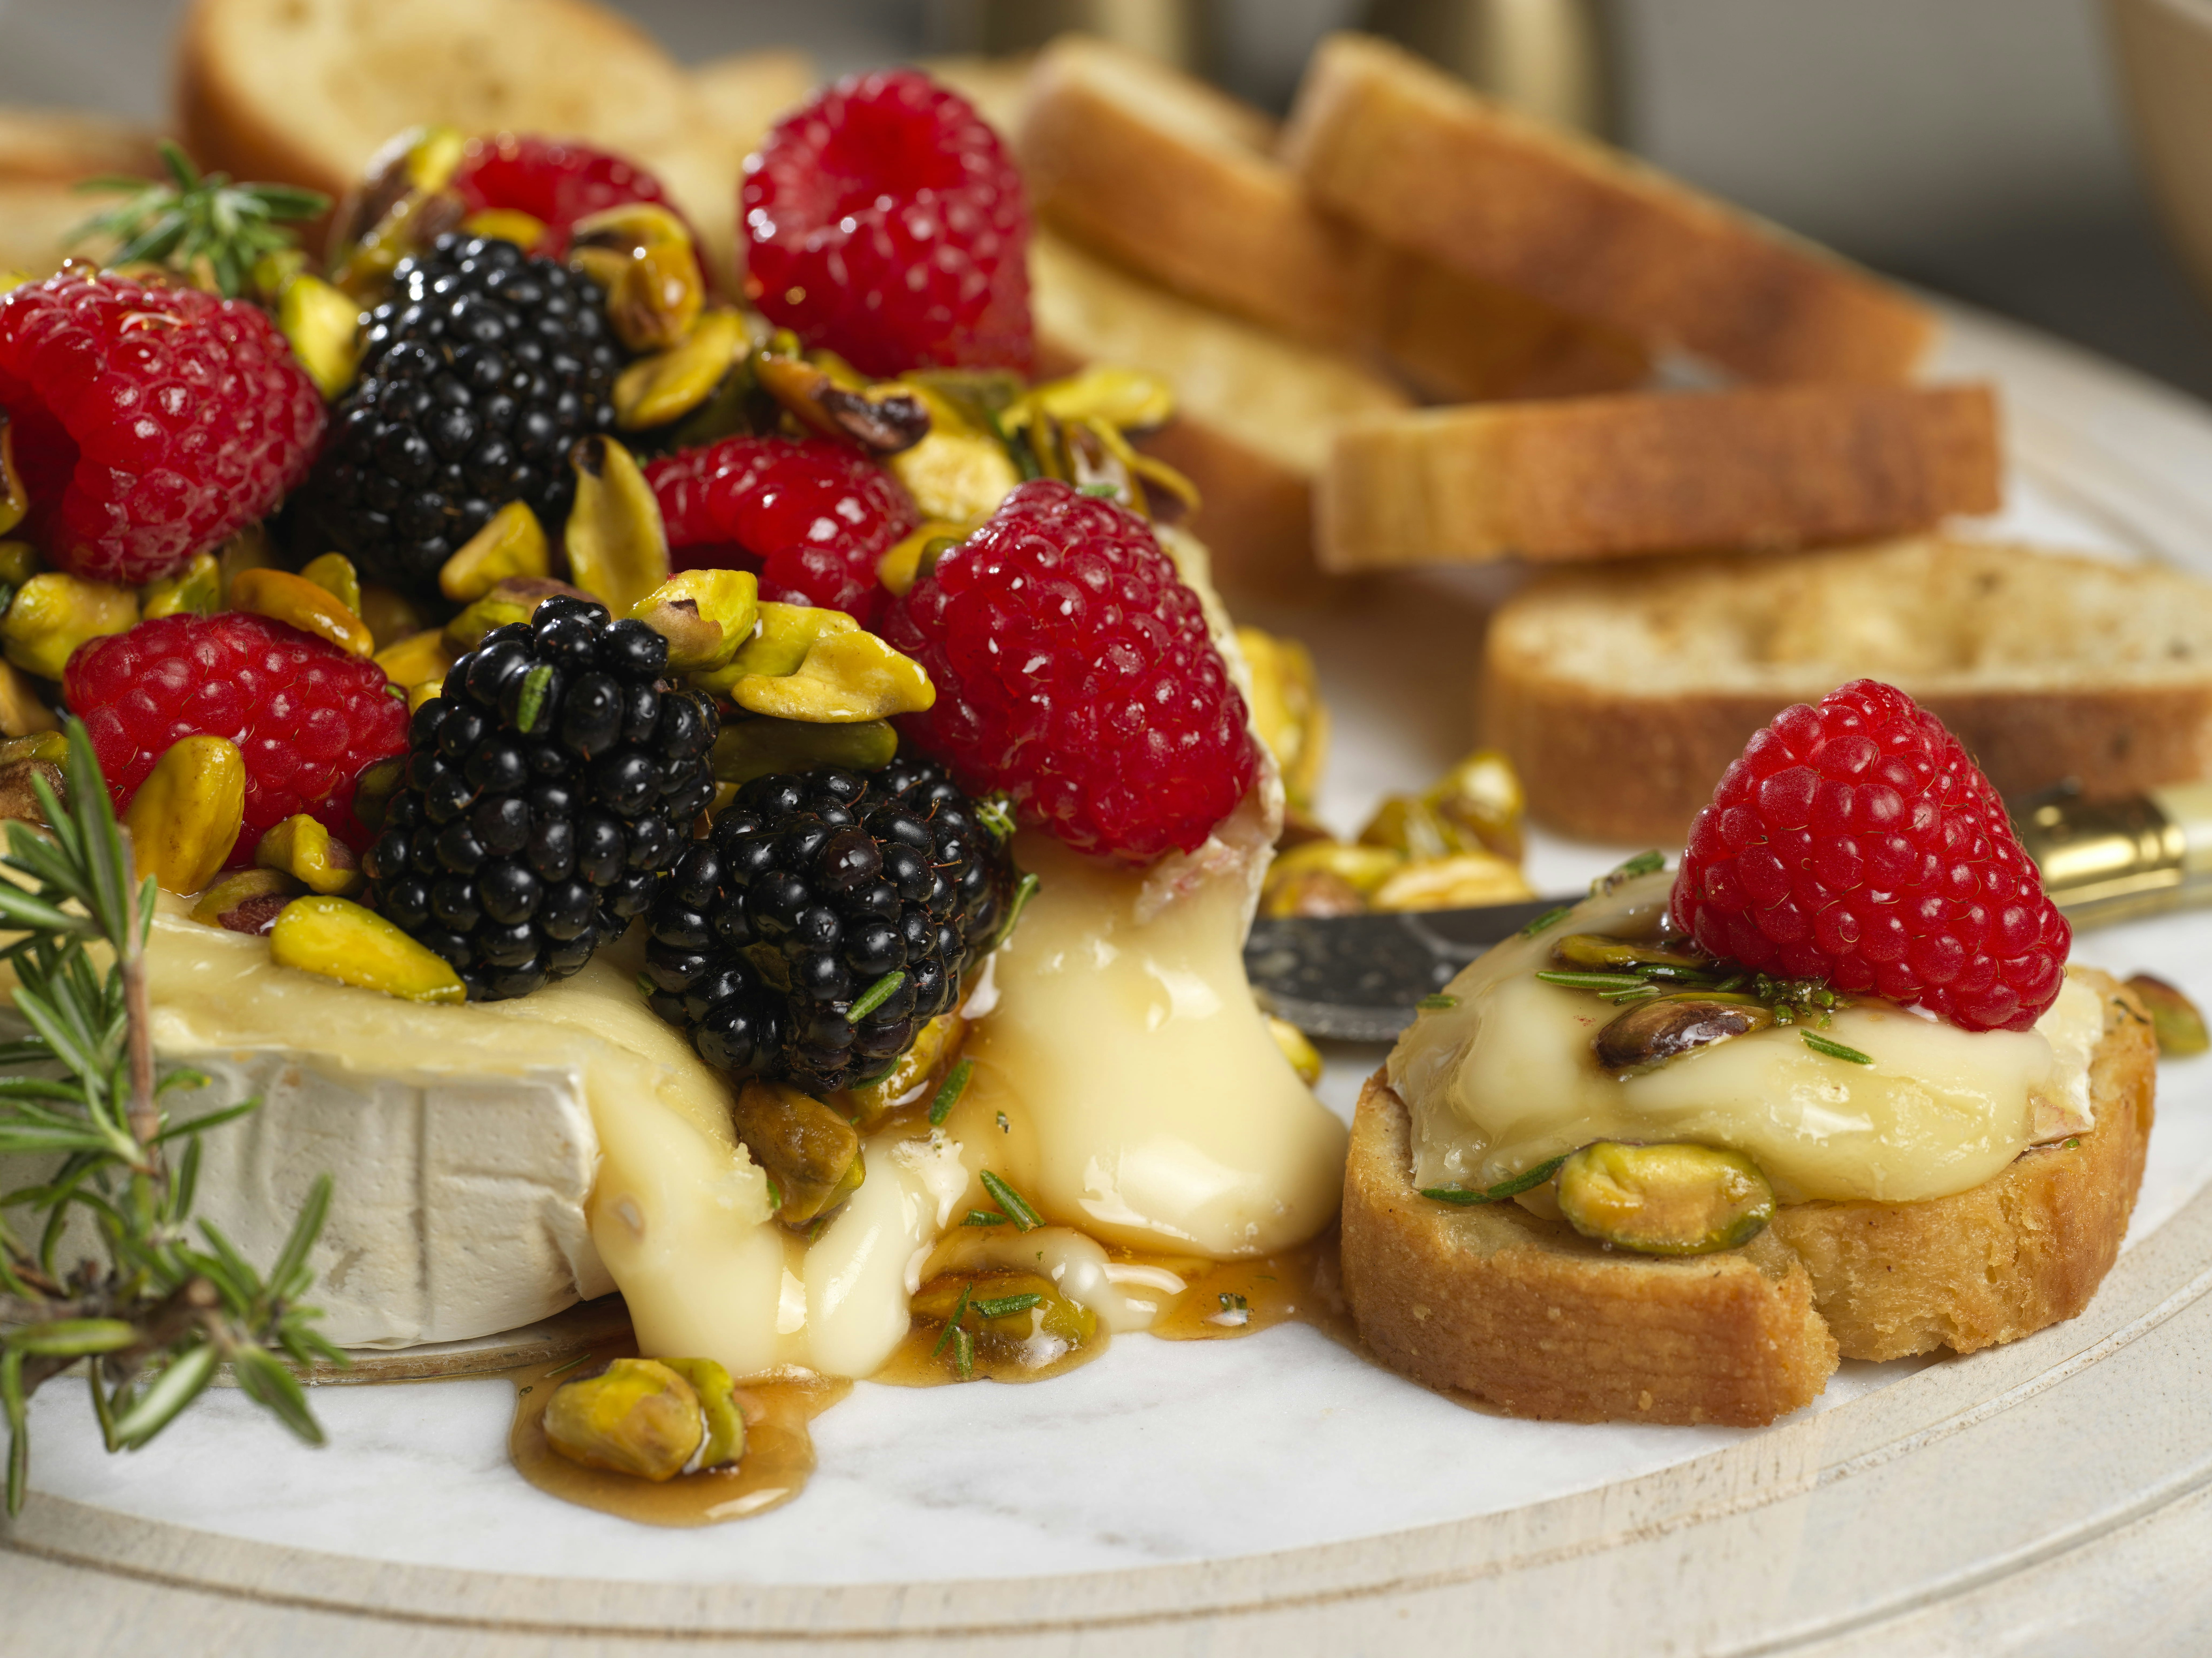 Baked brie with honeyed raspberries and pistachios